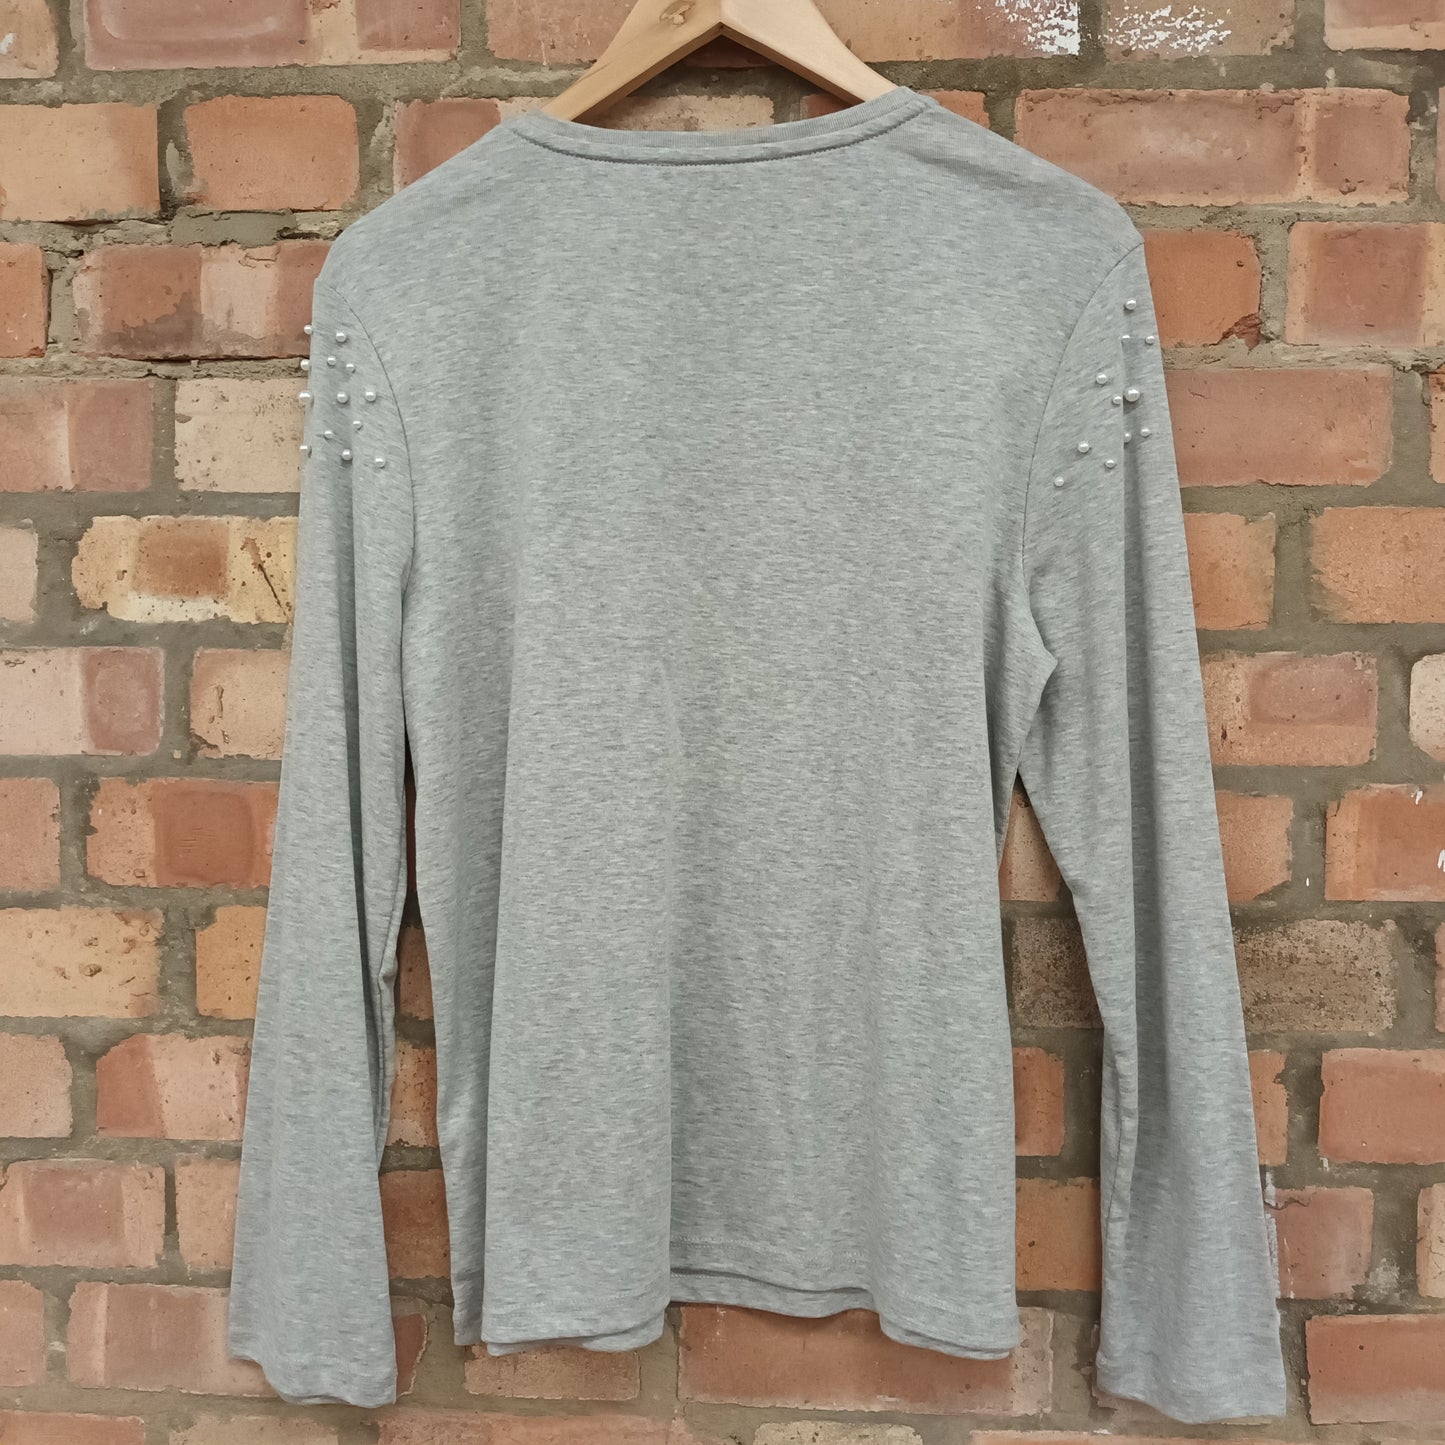 Maine New England Size 18 Grey Long Sleeve Top